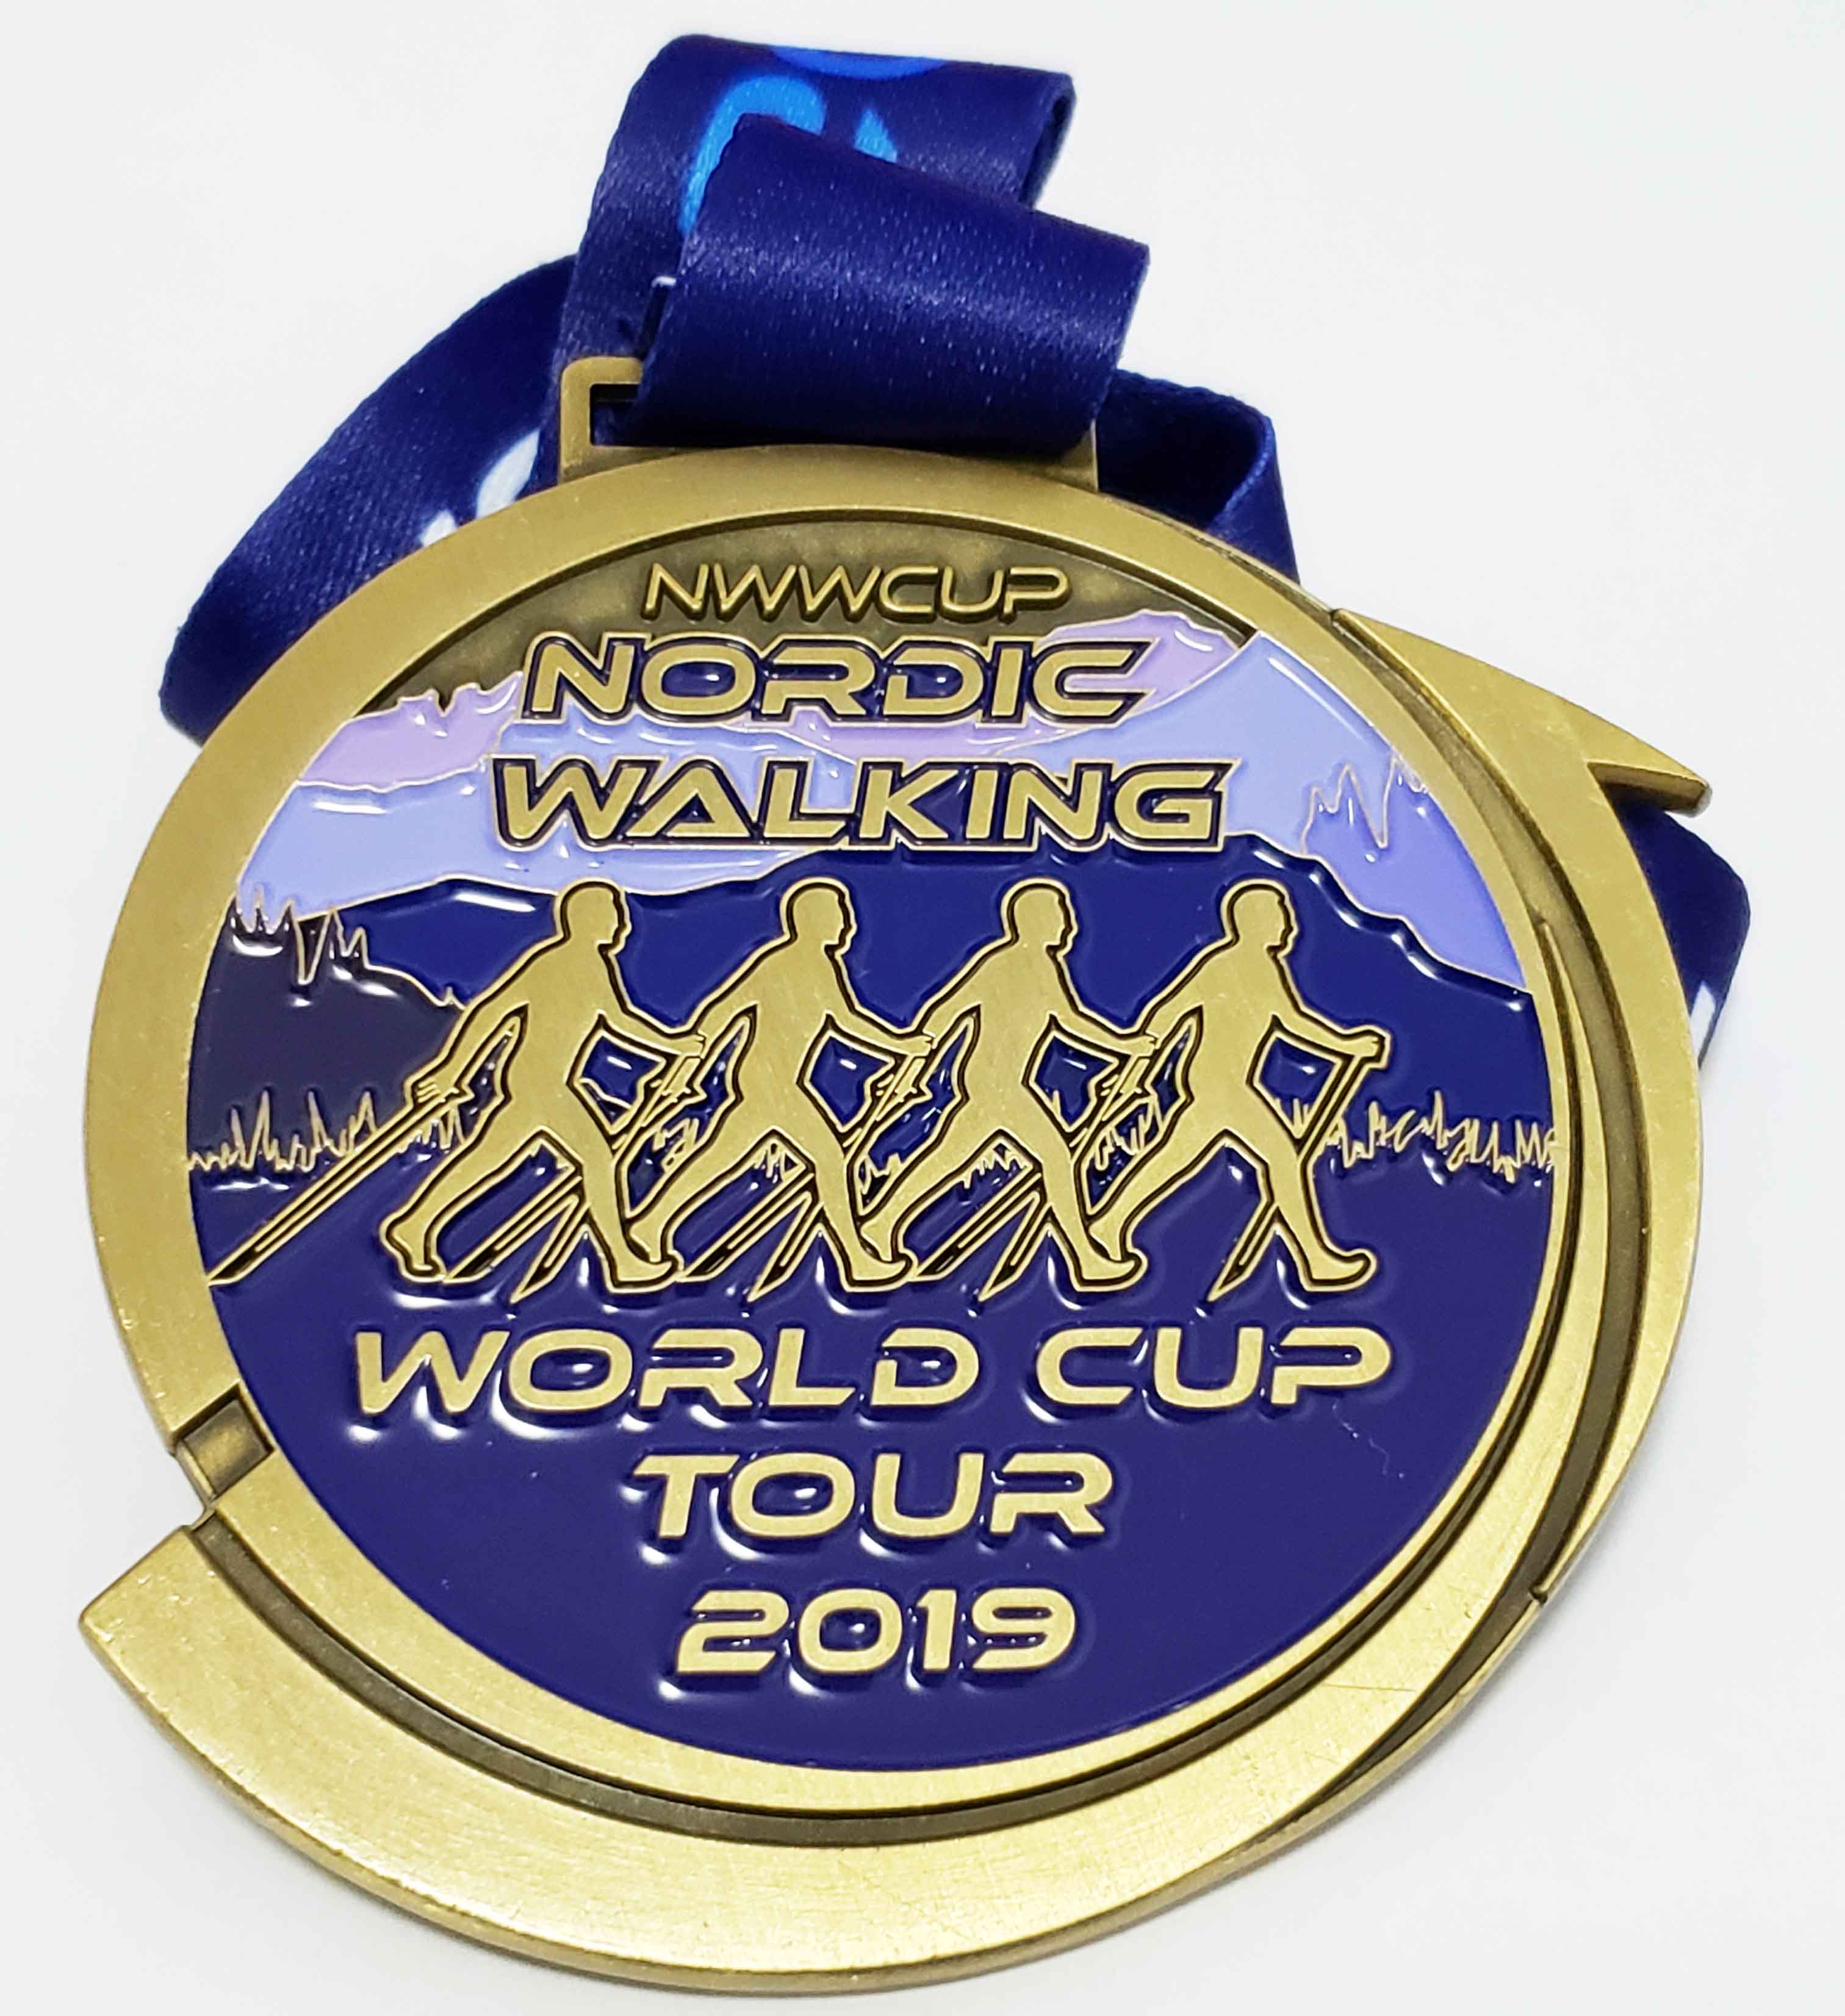 Walking medals for world cup tour